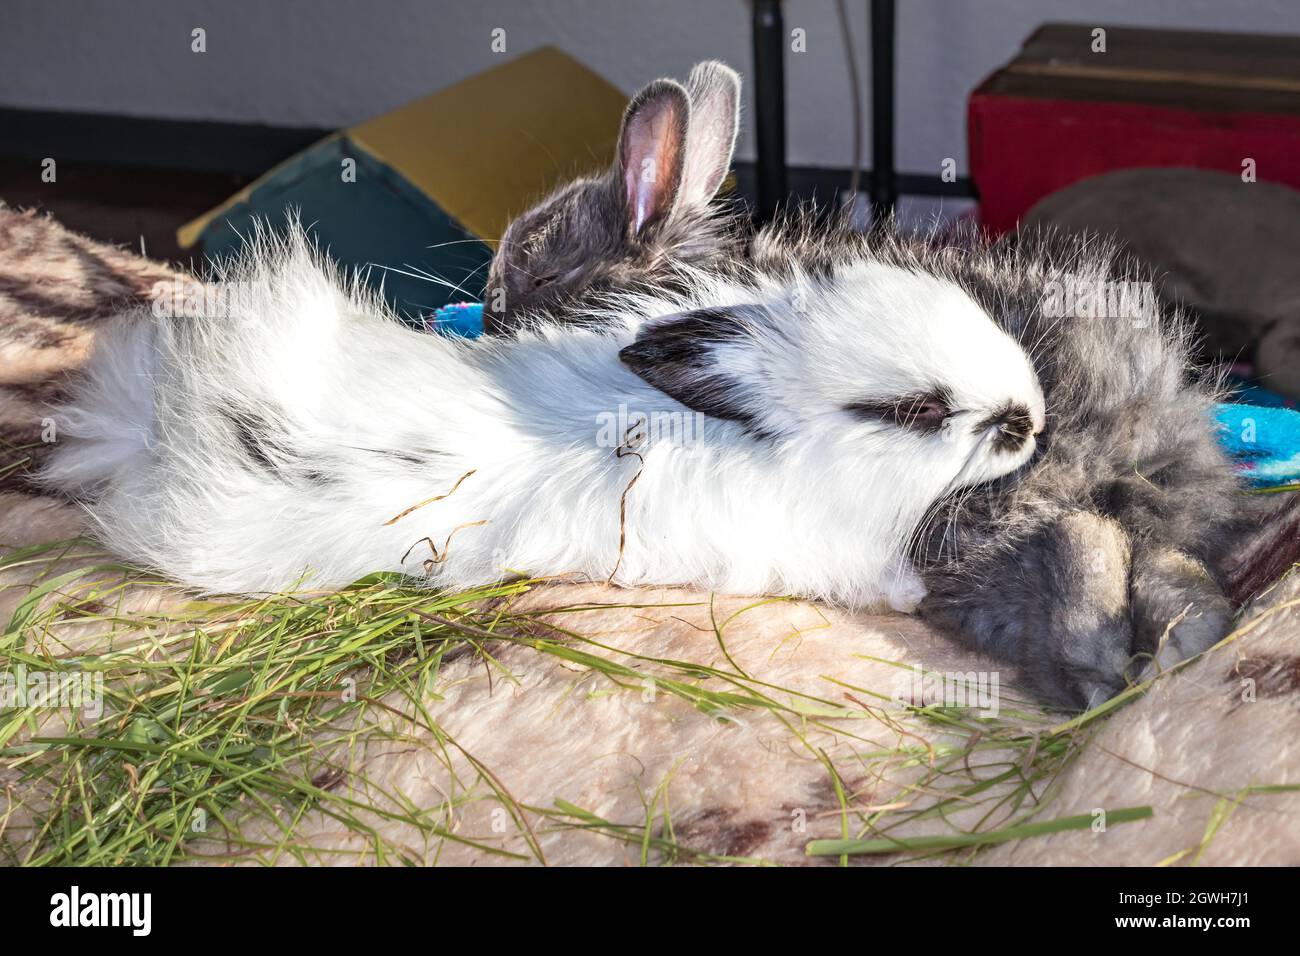 Domestic white and grey baby Jersey Wooly rabbit eating and sleeping, Cape Town, South Africa Stock Photo